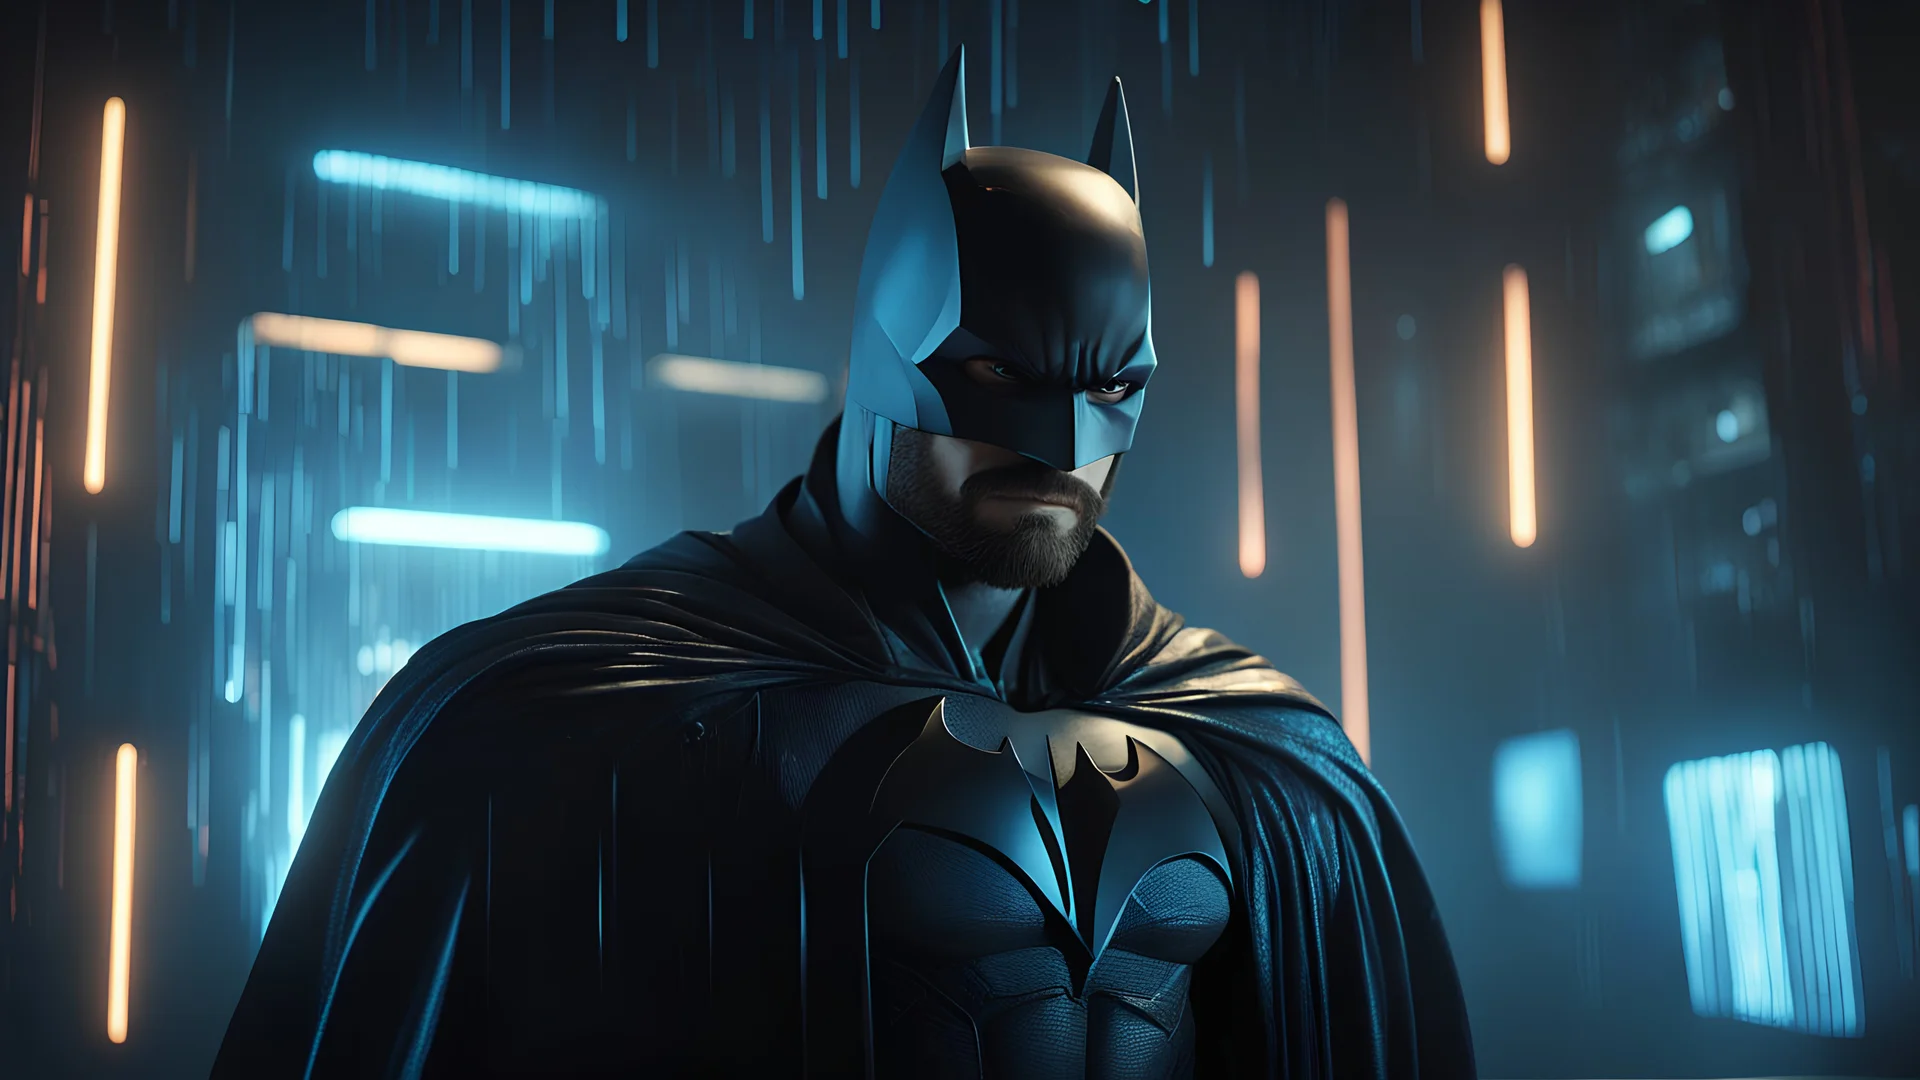 "In a dimly lit YouTuber's room, a mysterious figure stands, their face obscured by the iconic pointed beard of Batman. The room is adorned with modern holographic lights, casting an otherworldly glow. Subtle elements reminiscent of 'The Matrix' permeate the scene, with digital rain and code streams adding a cyberpunk vibe." 4K Resolution and Hyper realistic